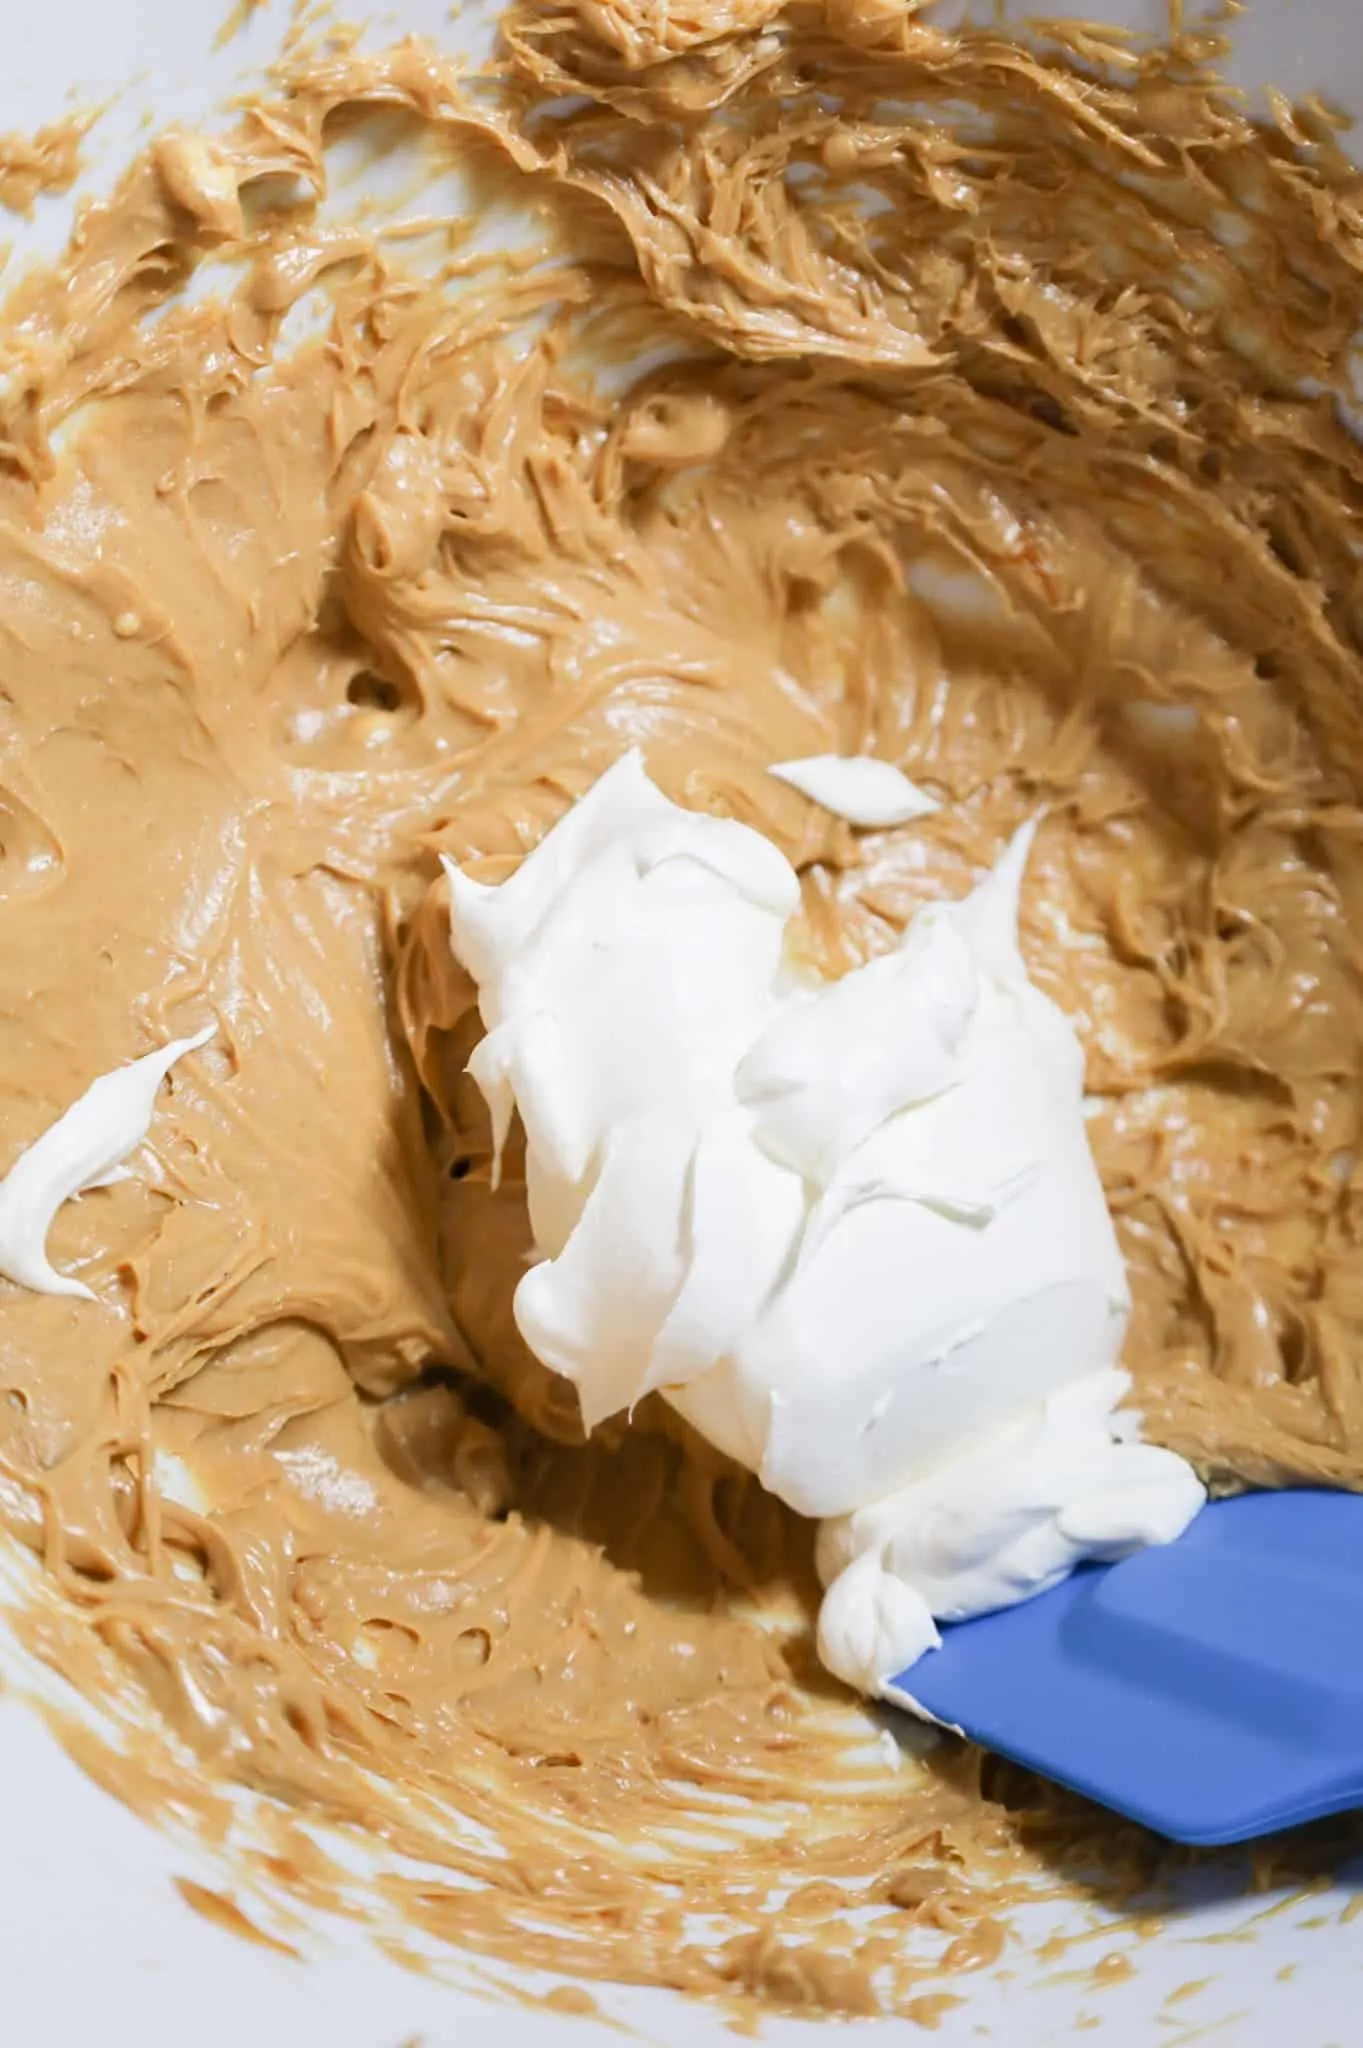 Cool Whip on top of cream cheese and dulce de leche mixture in a mixing bowl